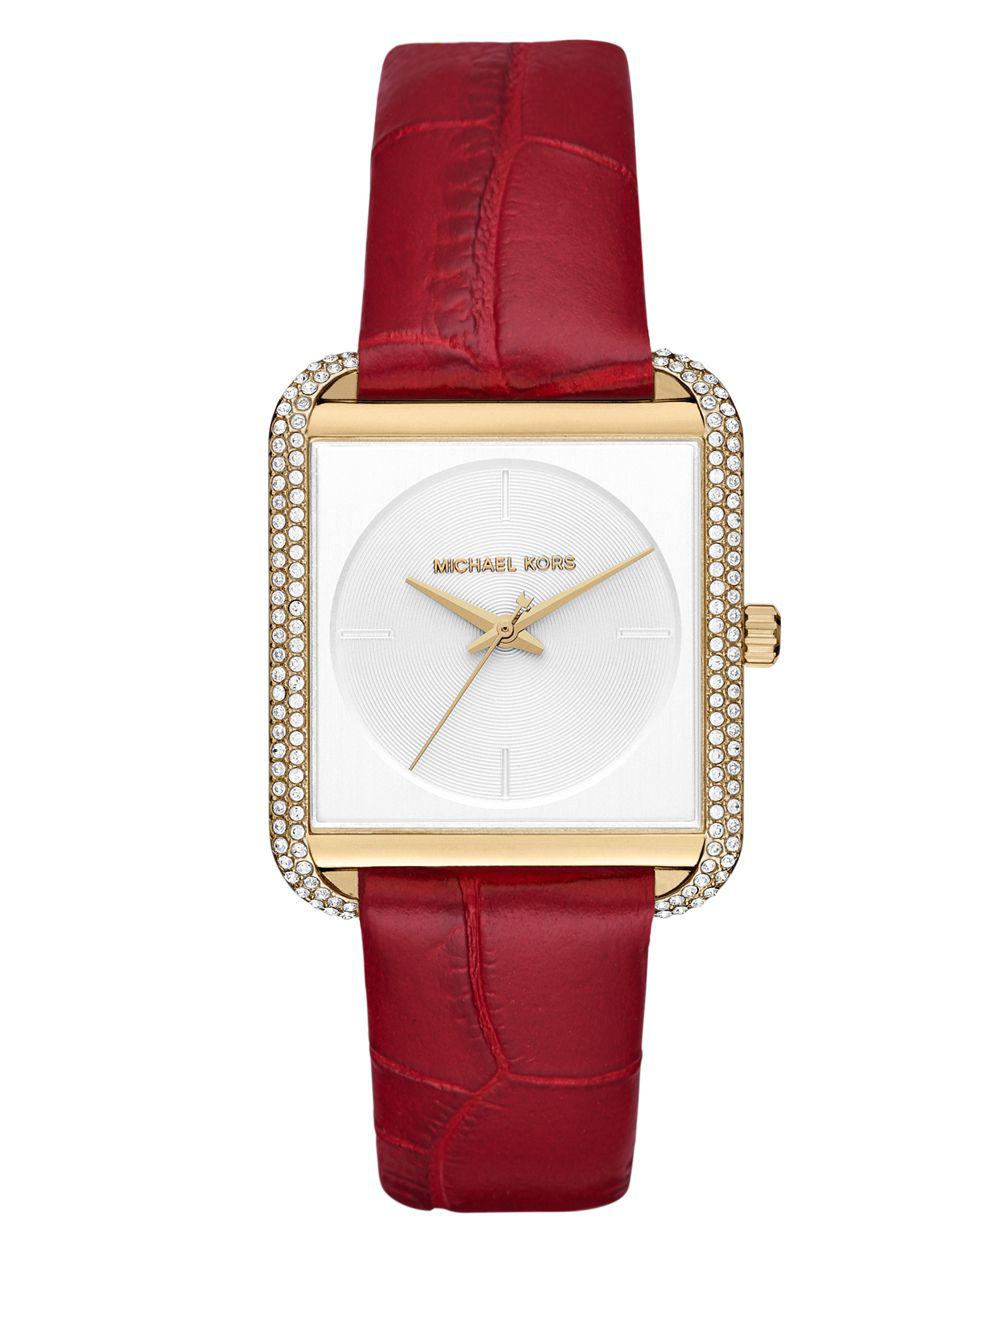 Michael Kors Lake Crystal Pave Square Leather Strap Watch Red - Lyst